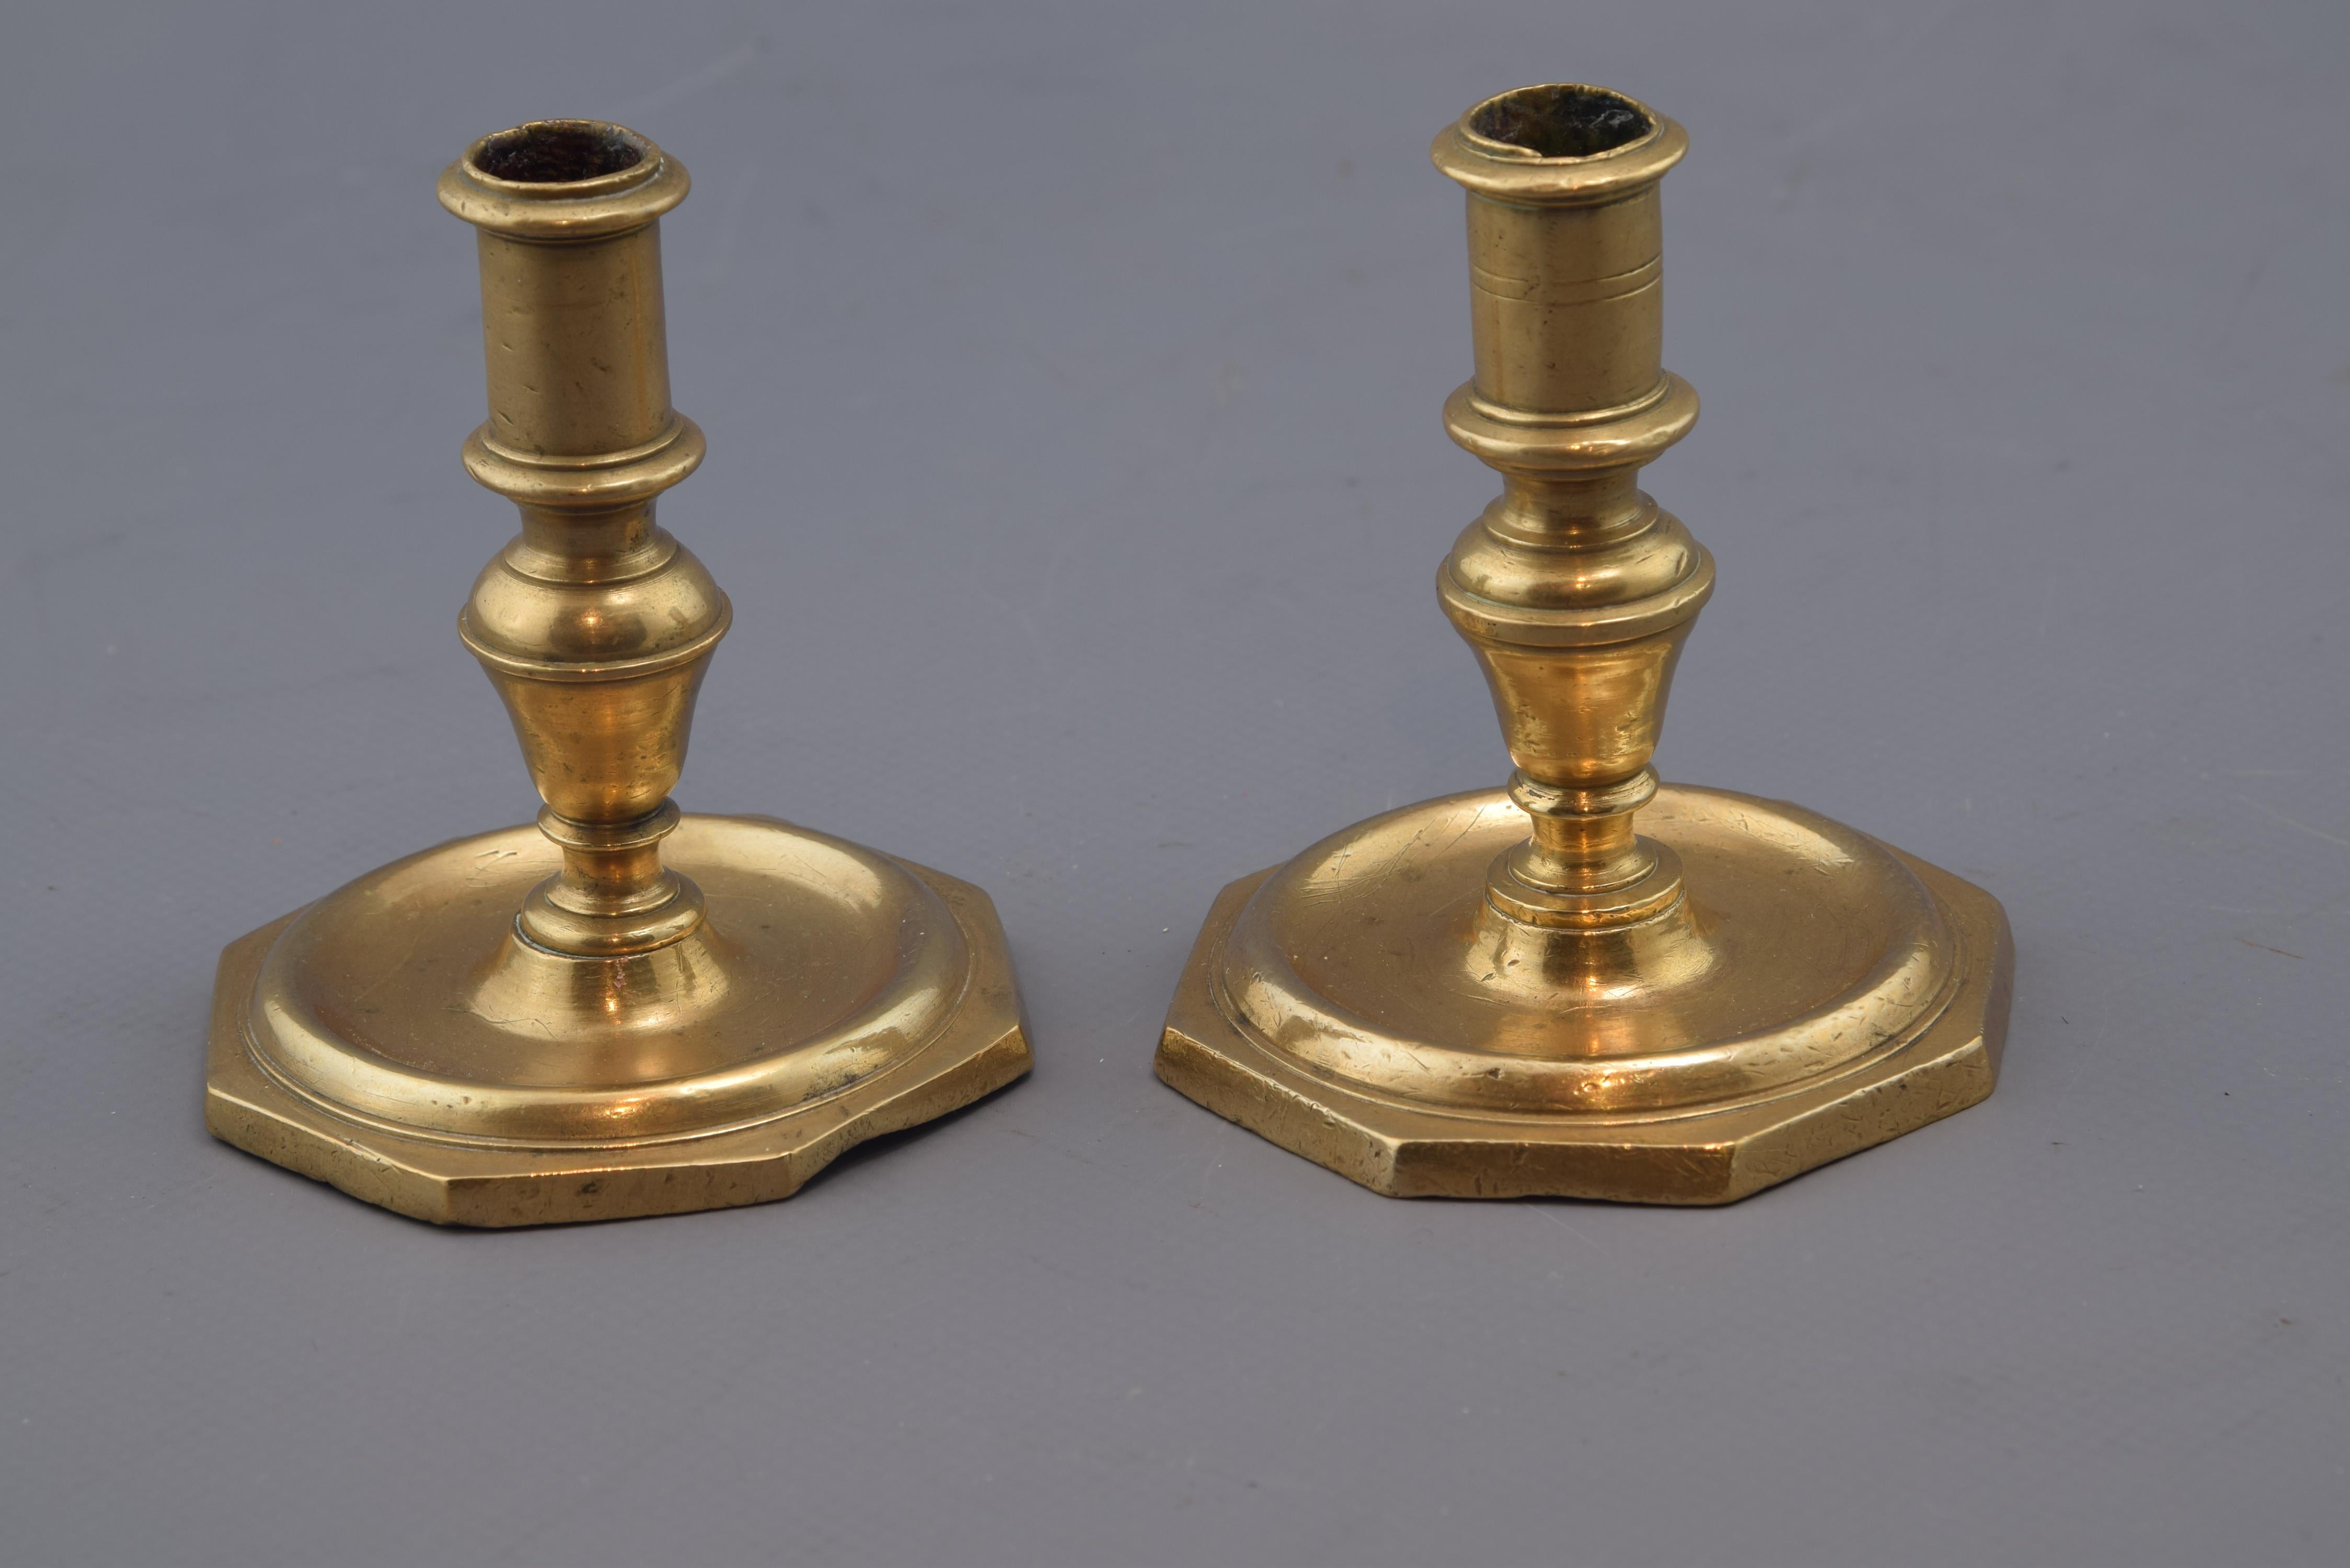 Pair of candlesticks with polygonal base in which is placed a smooth semi-circular molding, creating a projection that visually joins this exterior with the center; in the foot there are also other smooth moldings, combining projections and